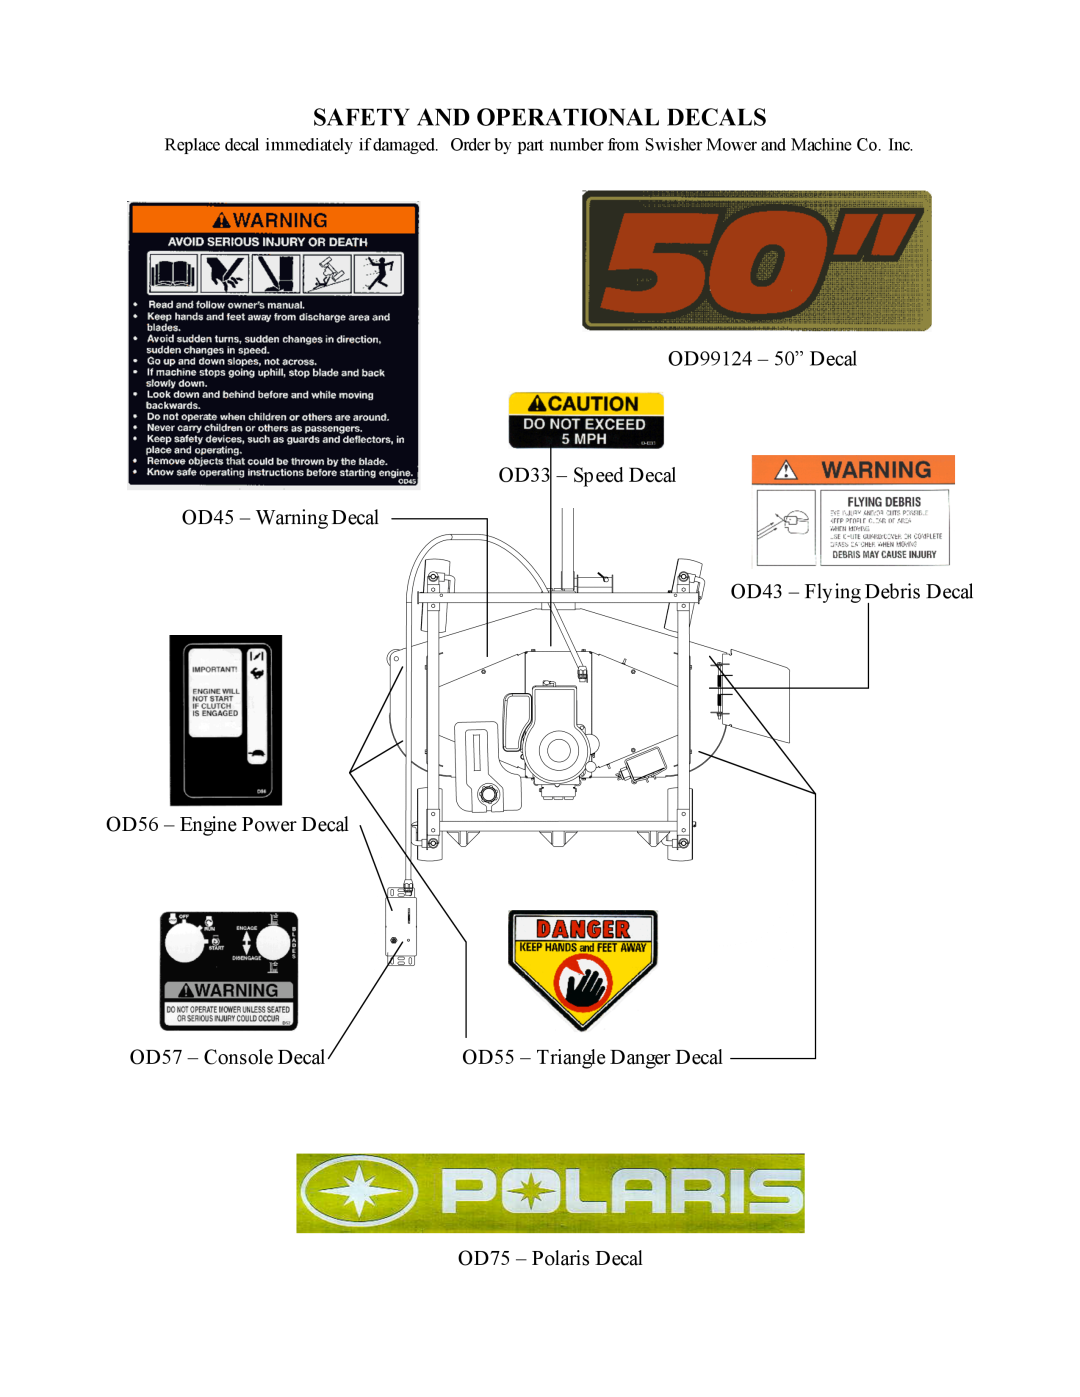 Swisher pol1250f owner manual Safety And Operational Decals, OD99124 - 50” Decal OD33 - Speed Decal OD45 - Warning Decal 